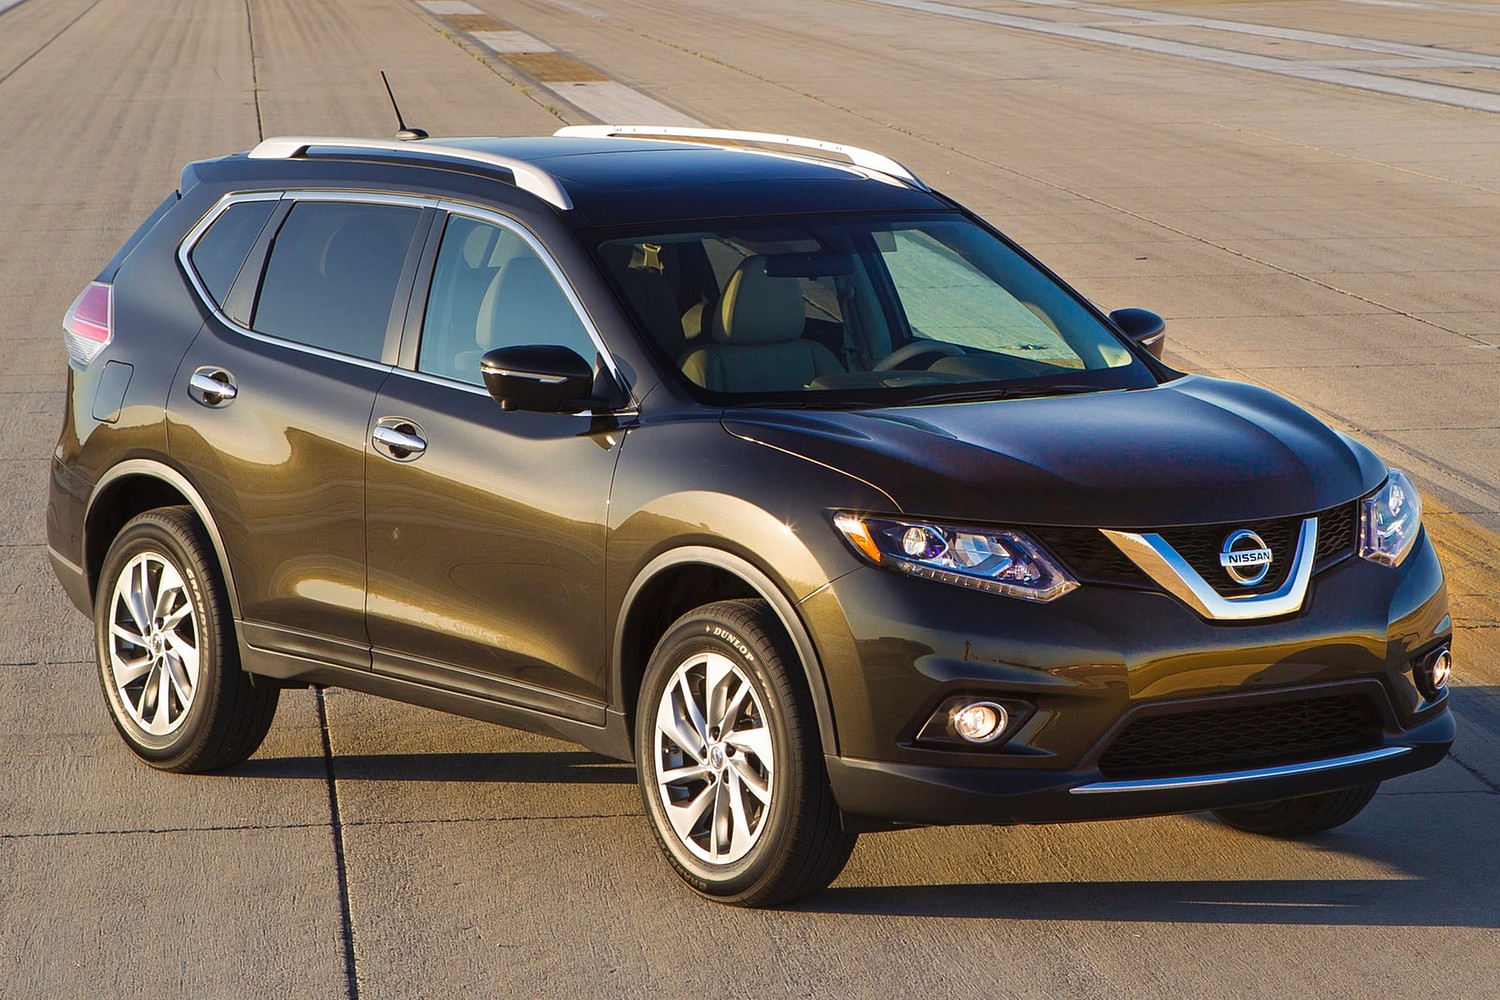 Nissan Rogue SL 4dr SUV Exterior (2014 model year shown)